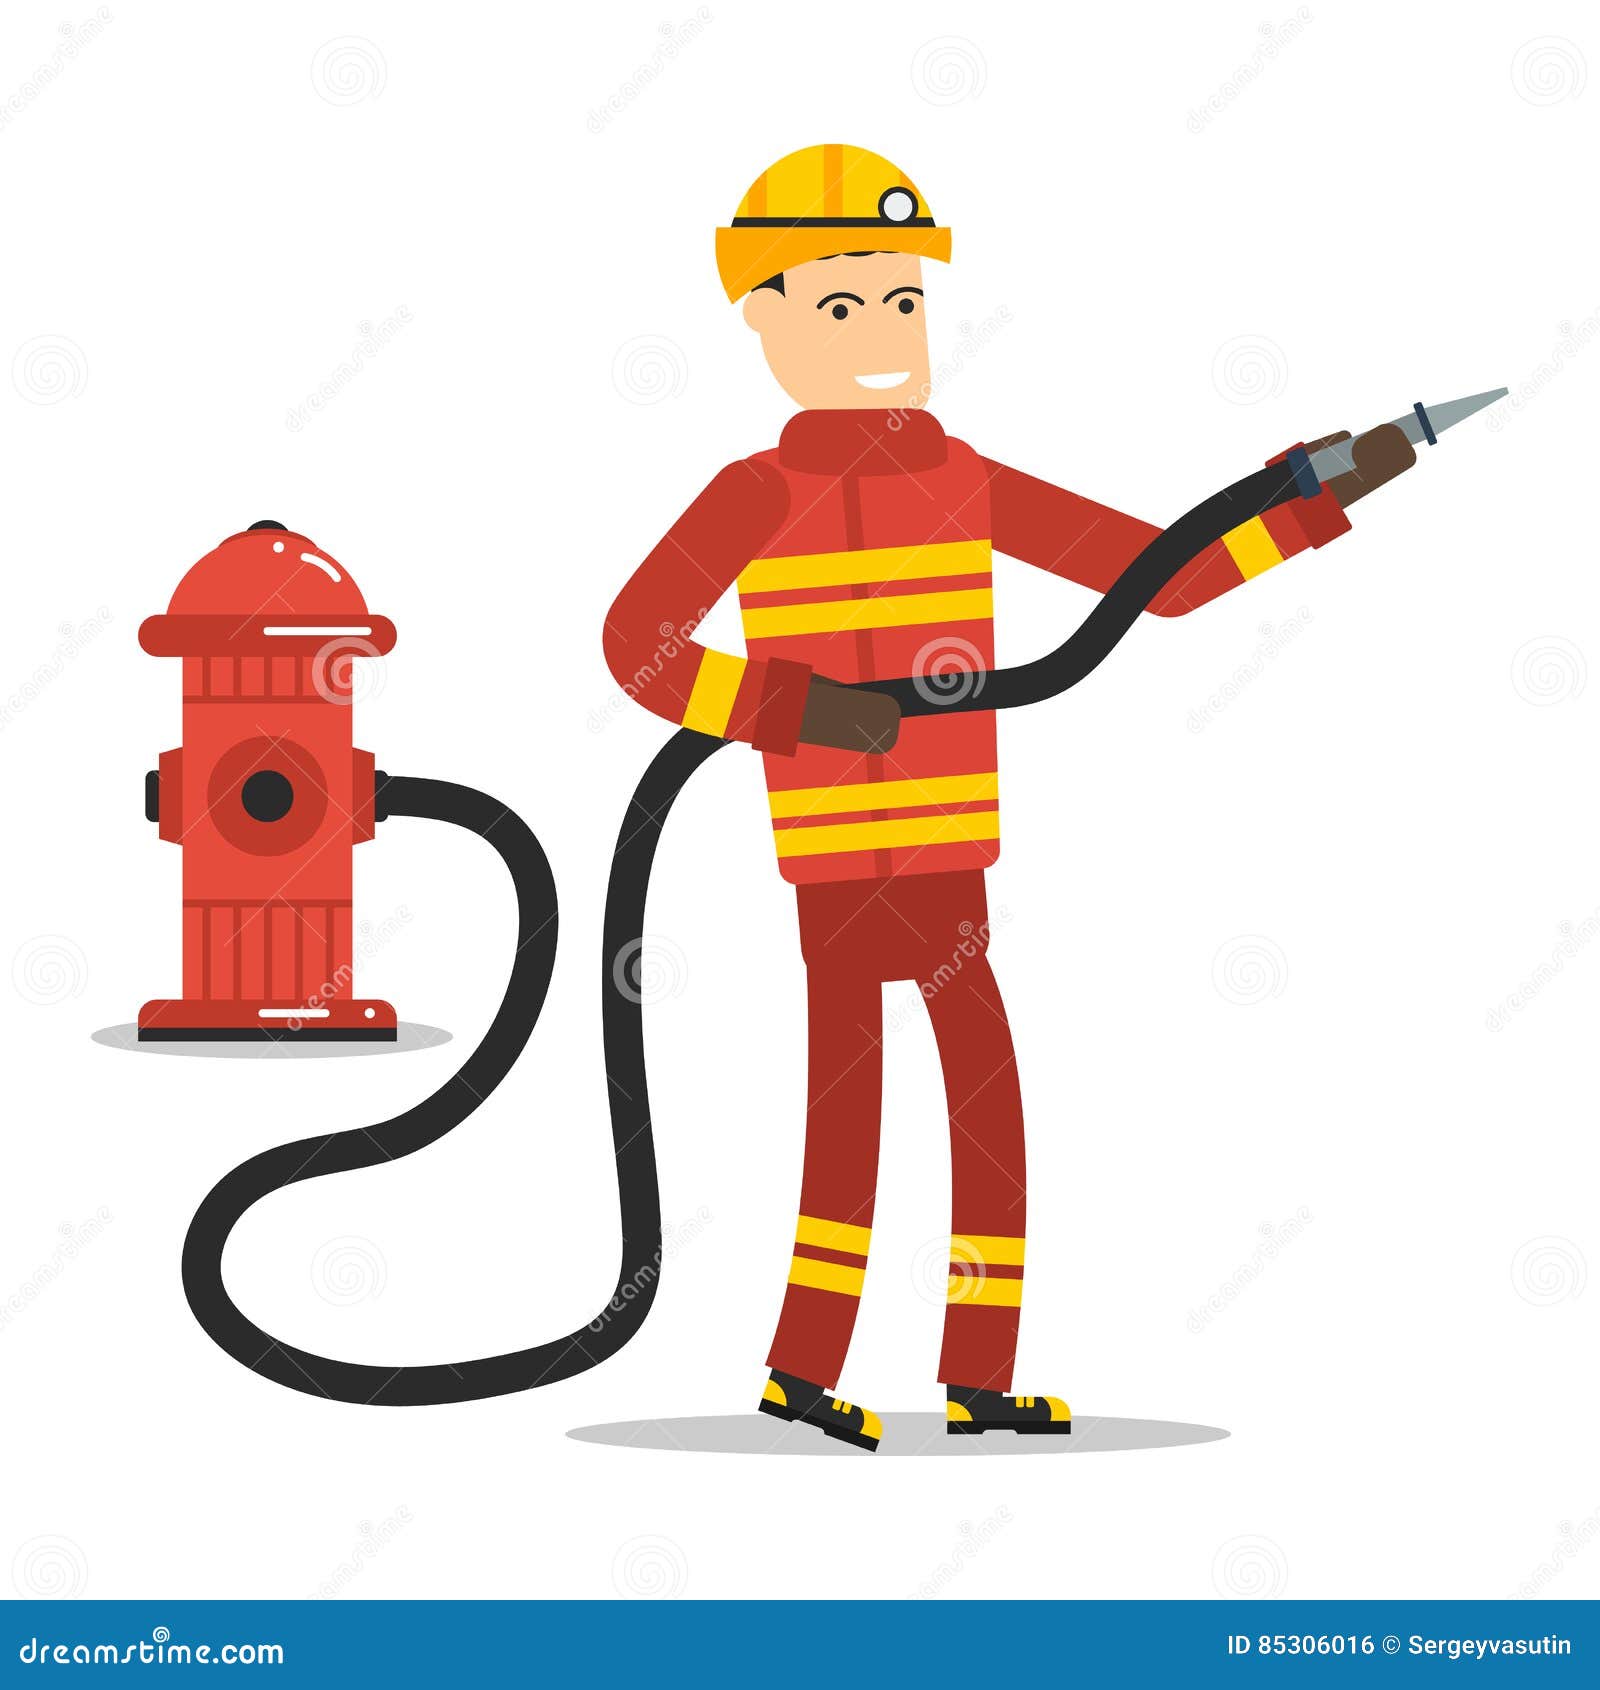 https://thumbs.dreamstime.com/z/firefighter-hose-hydrant-vector-flat-character-85306016.jpg